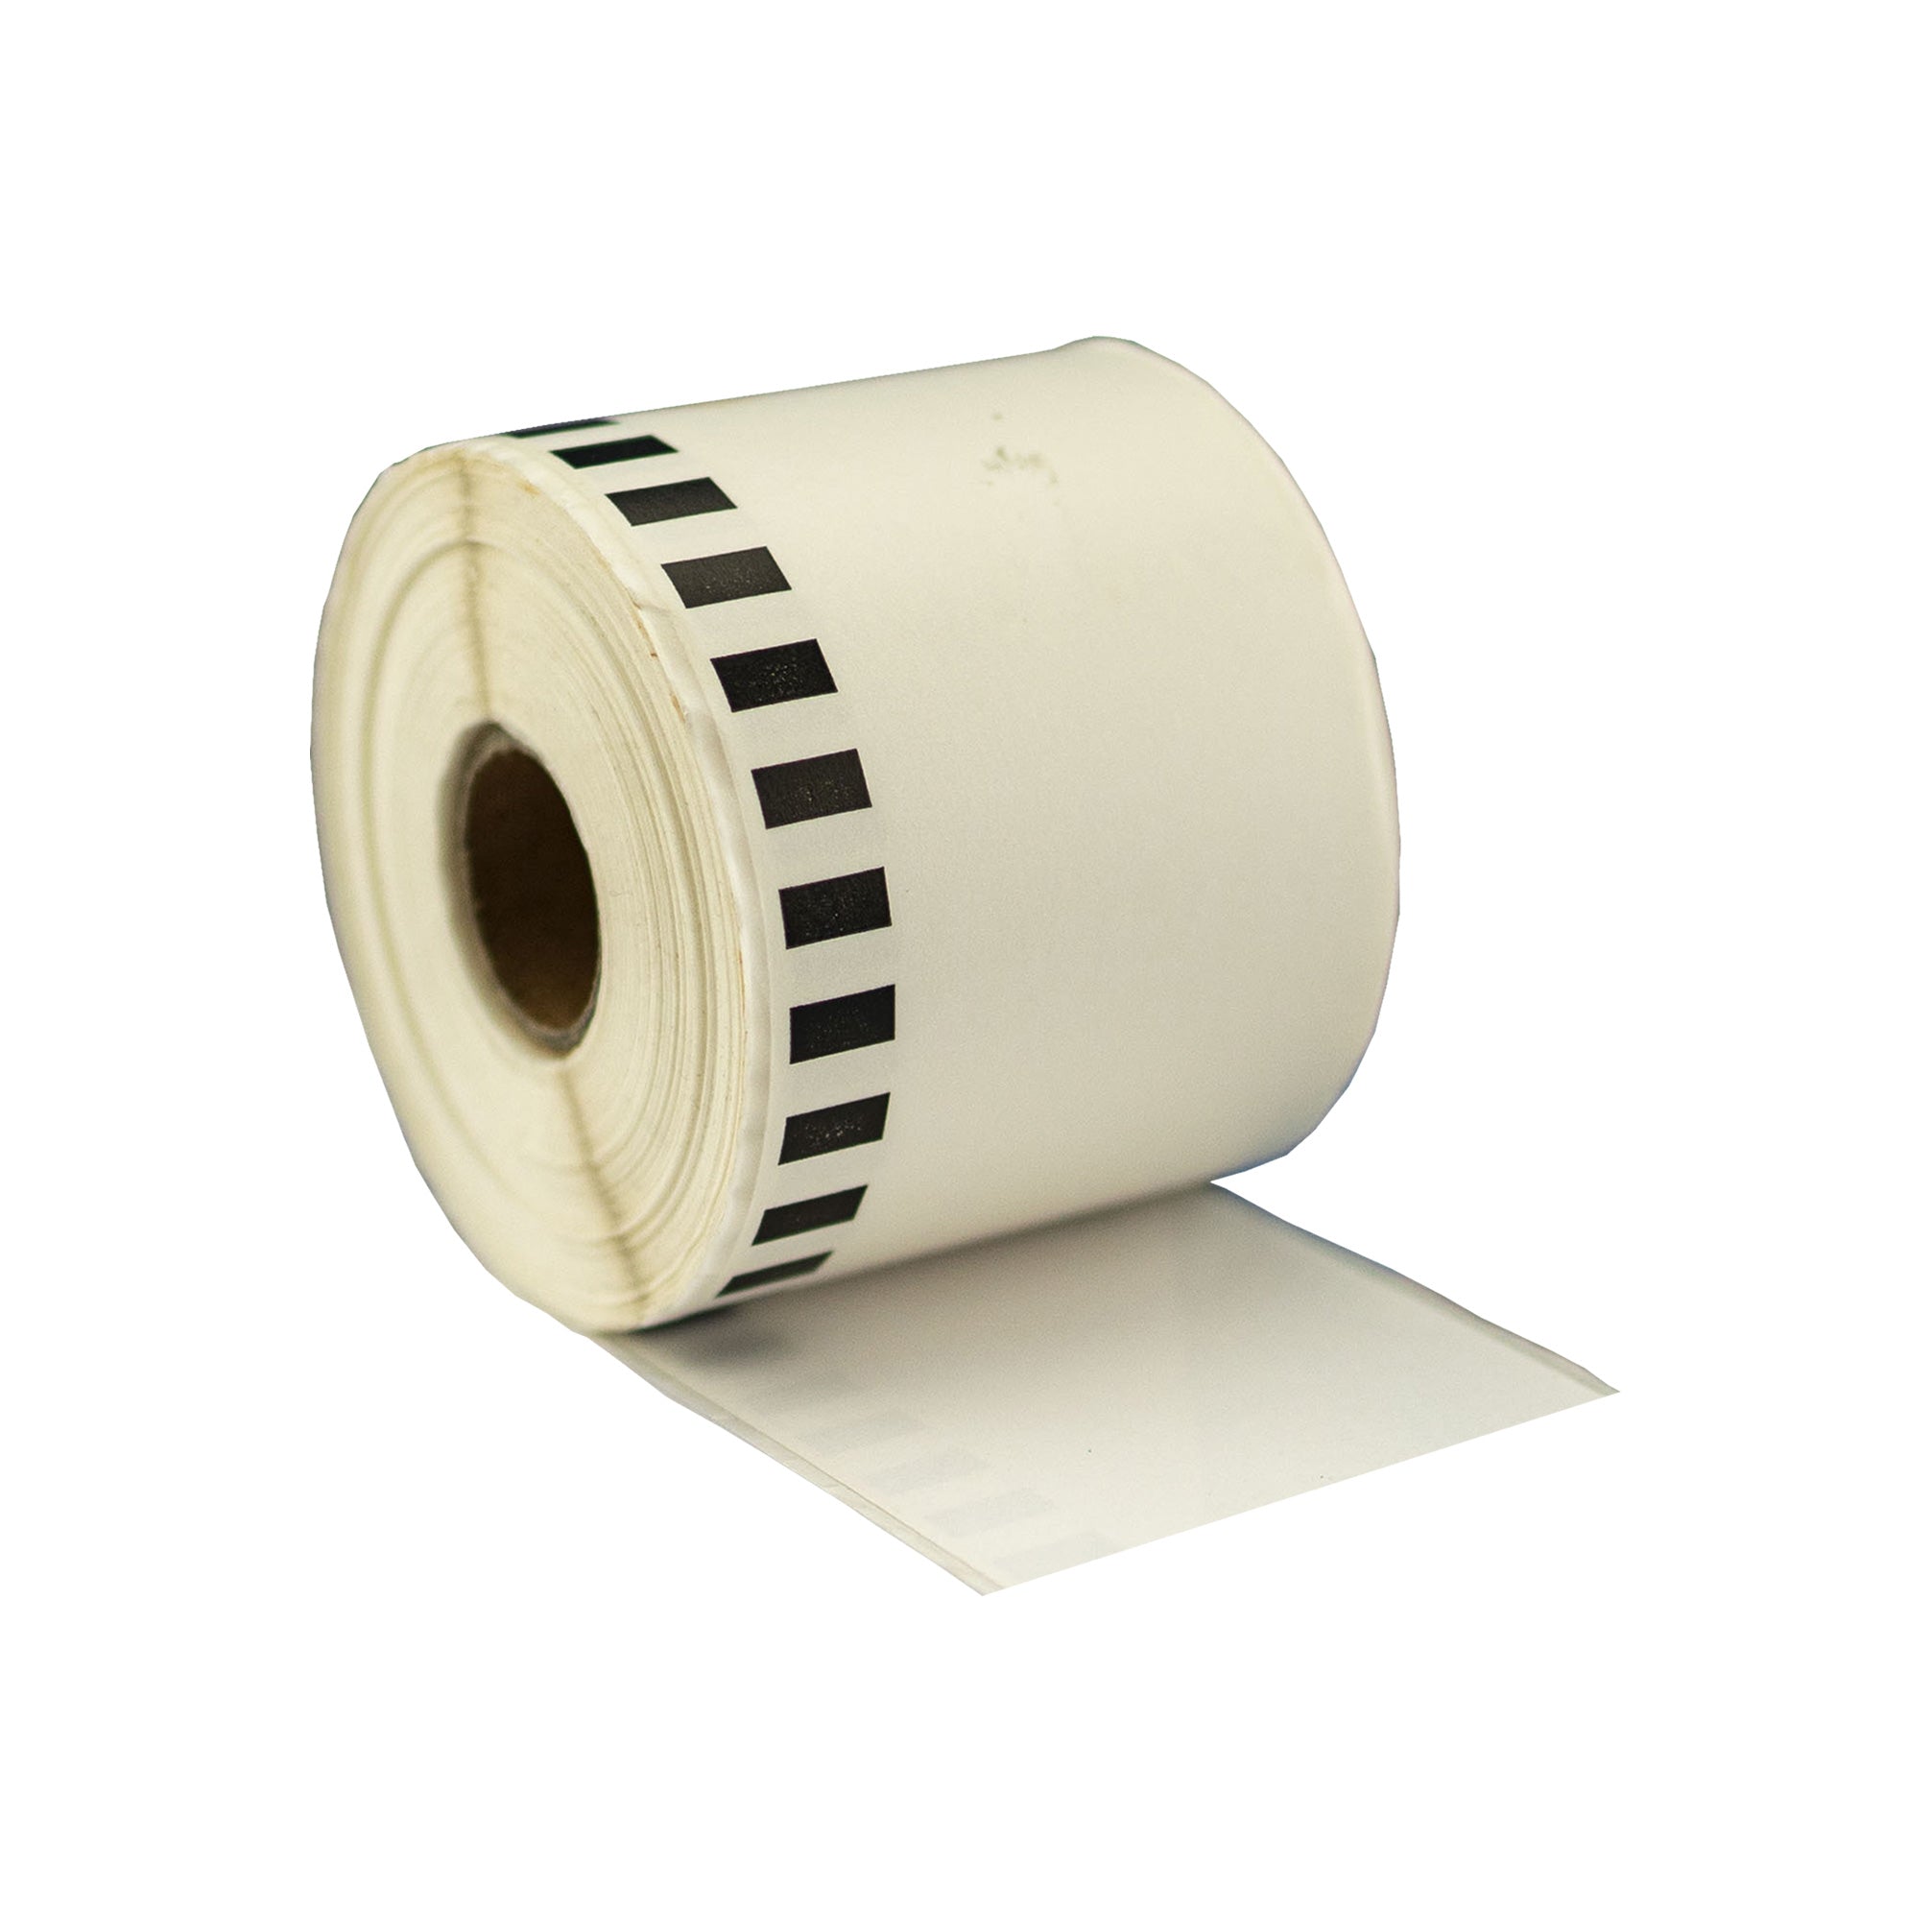 Compatible Brother DK-11202 Shipping White refill Labels 62 x 100mm/ 50 Rolls